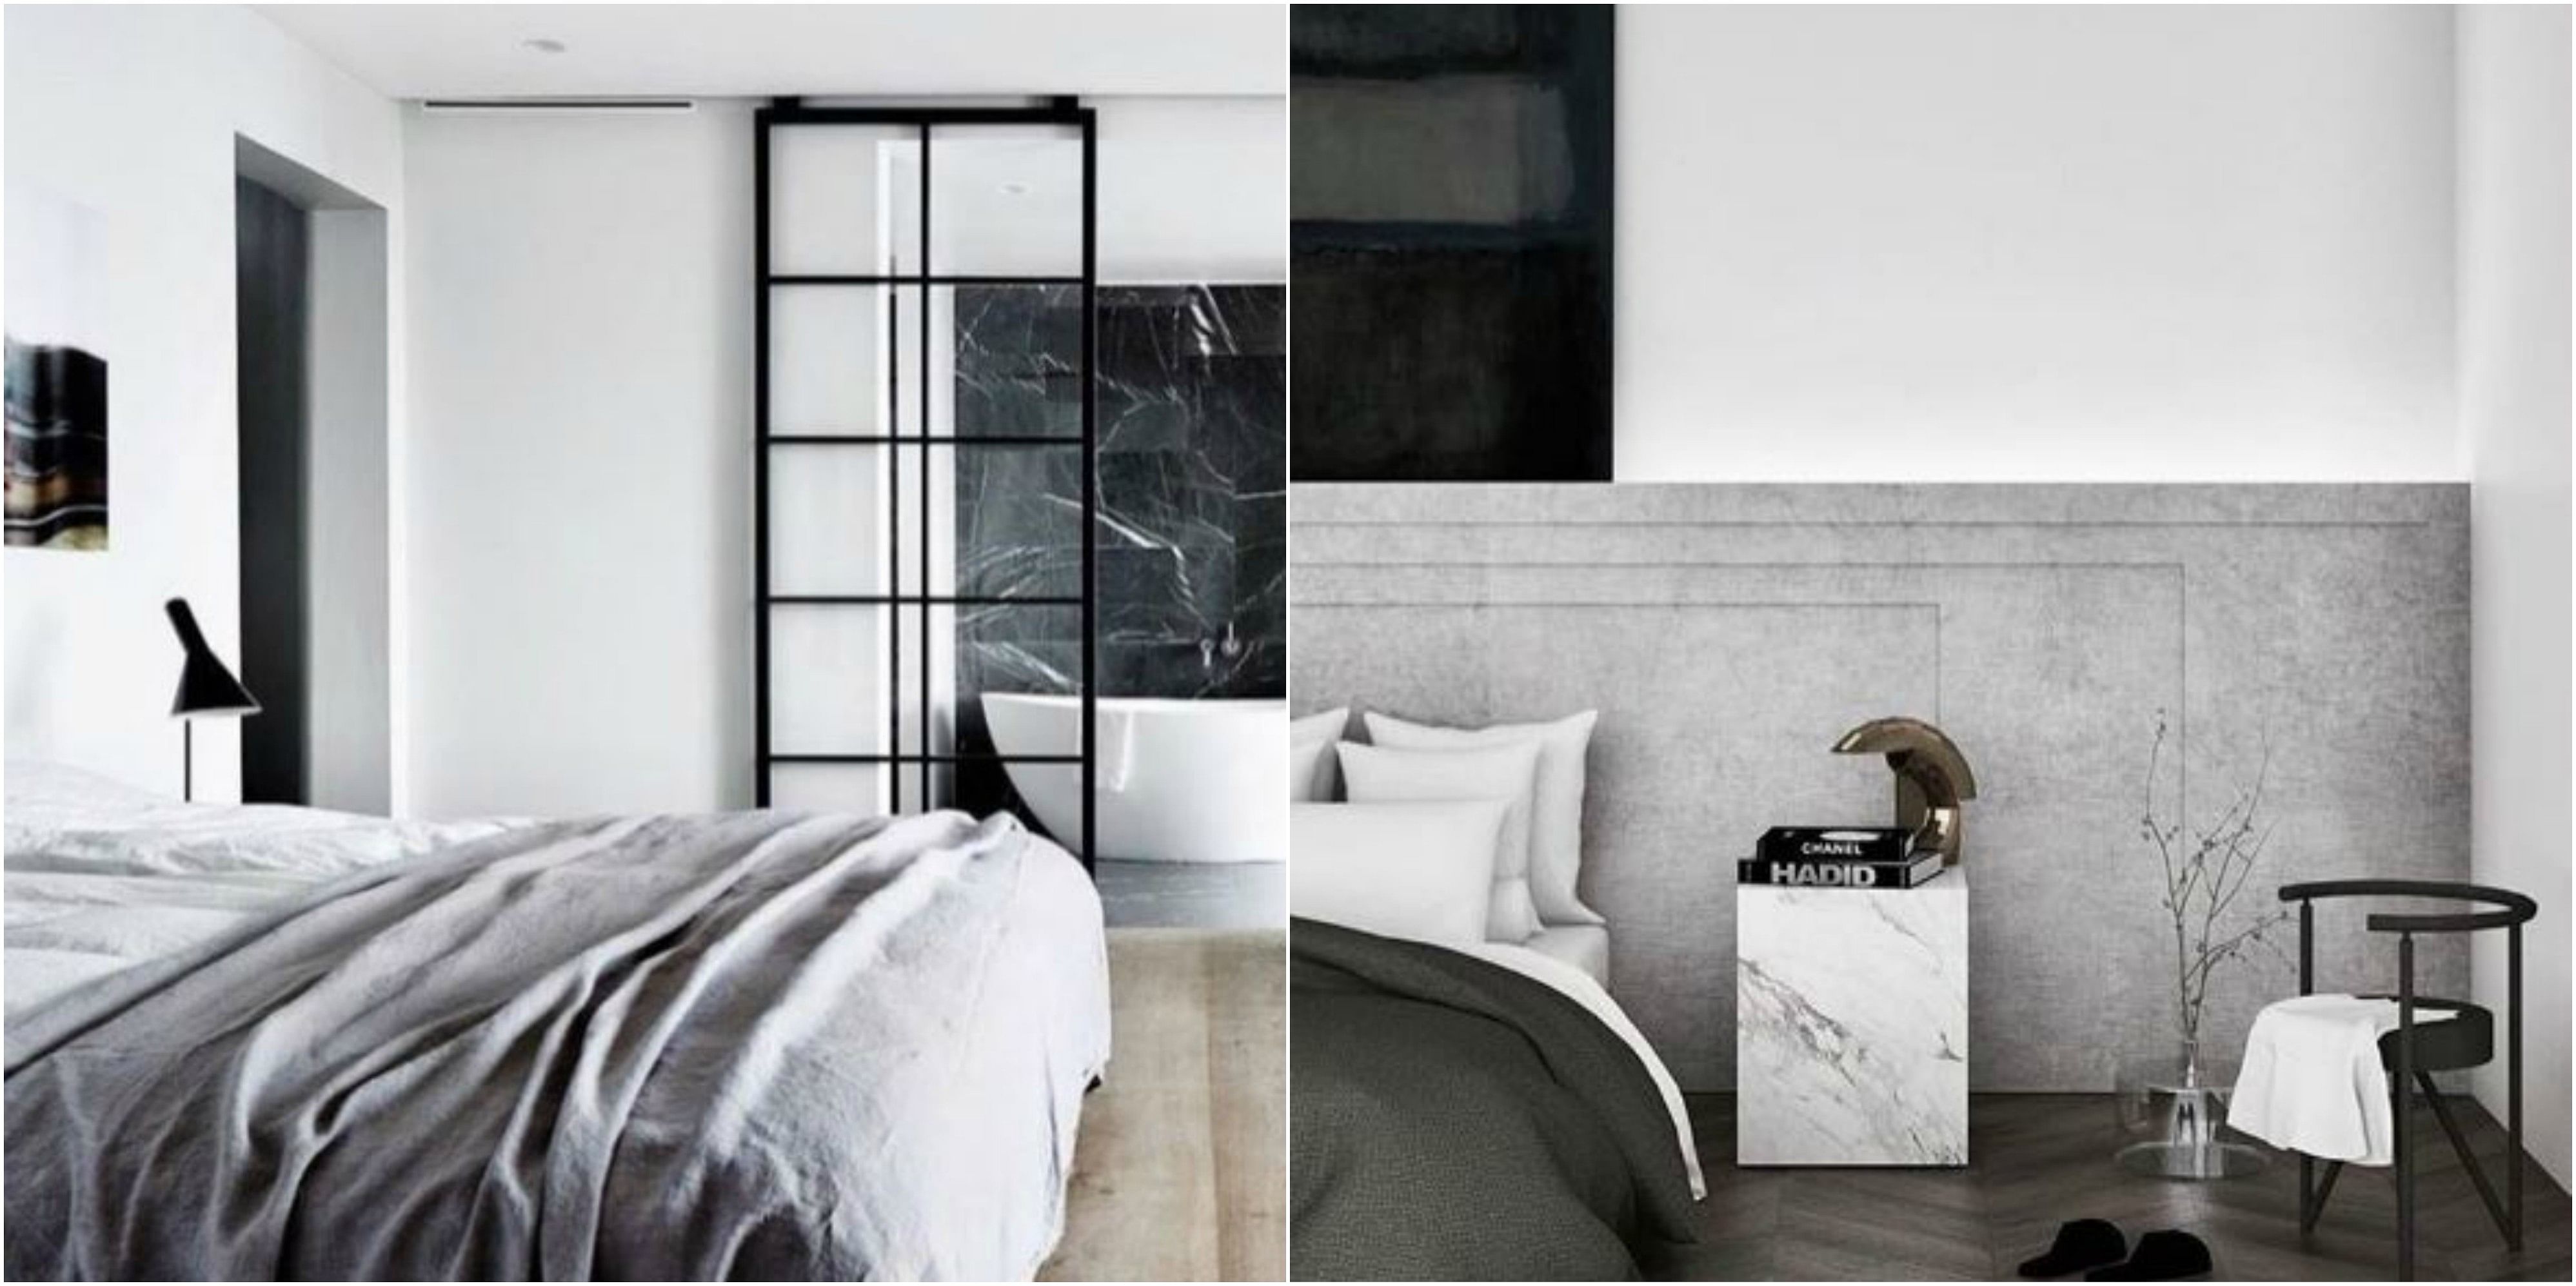 Bedroom Design Ideas Modern And Monochromatic For A Restful Space Home Decor Singapore